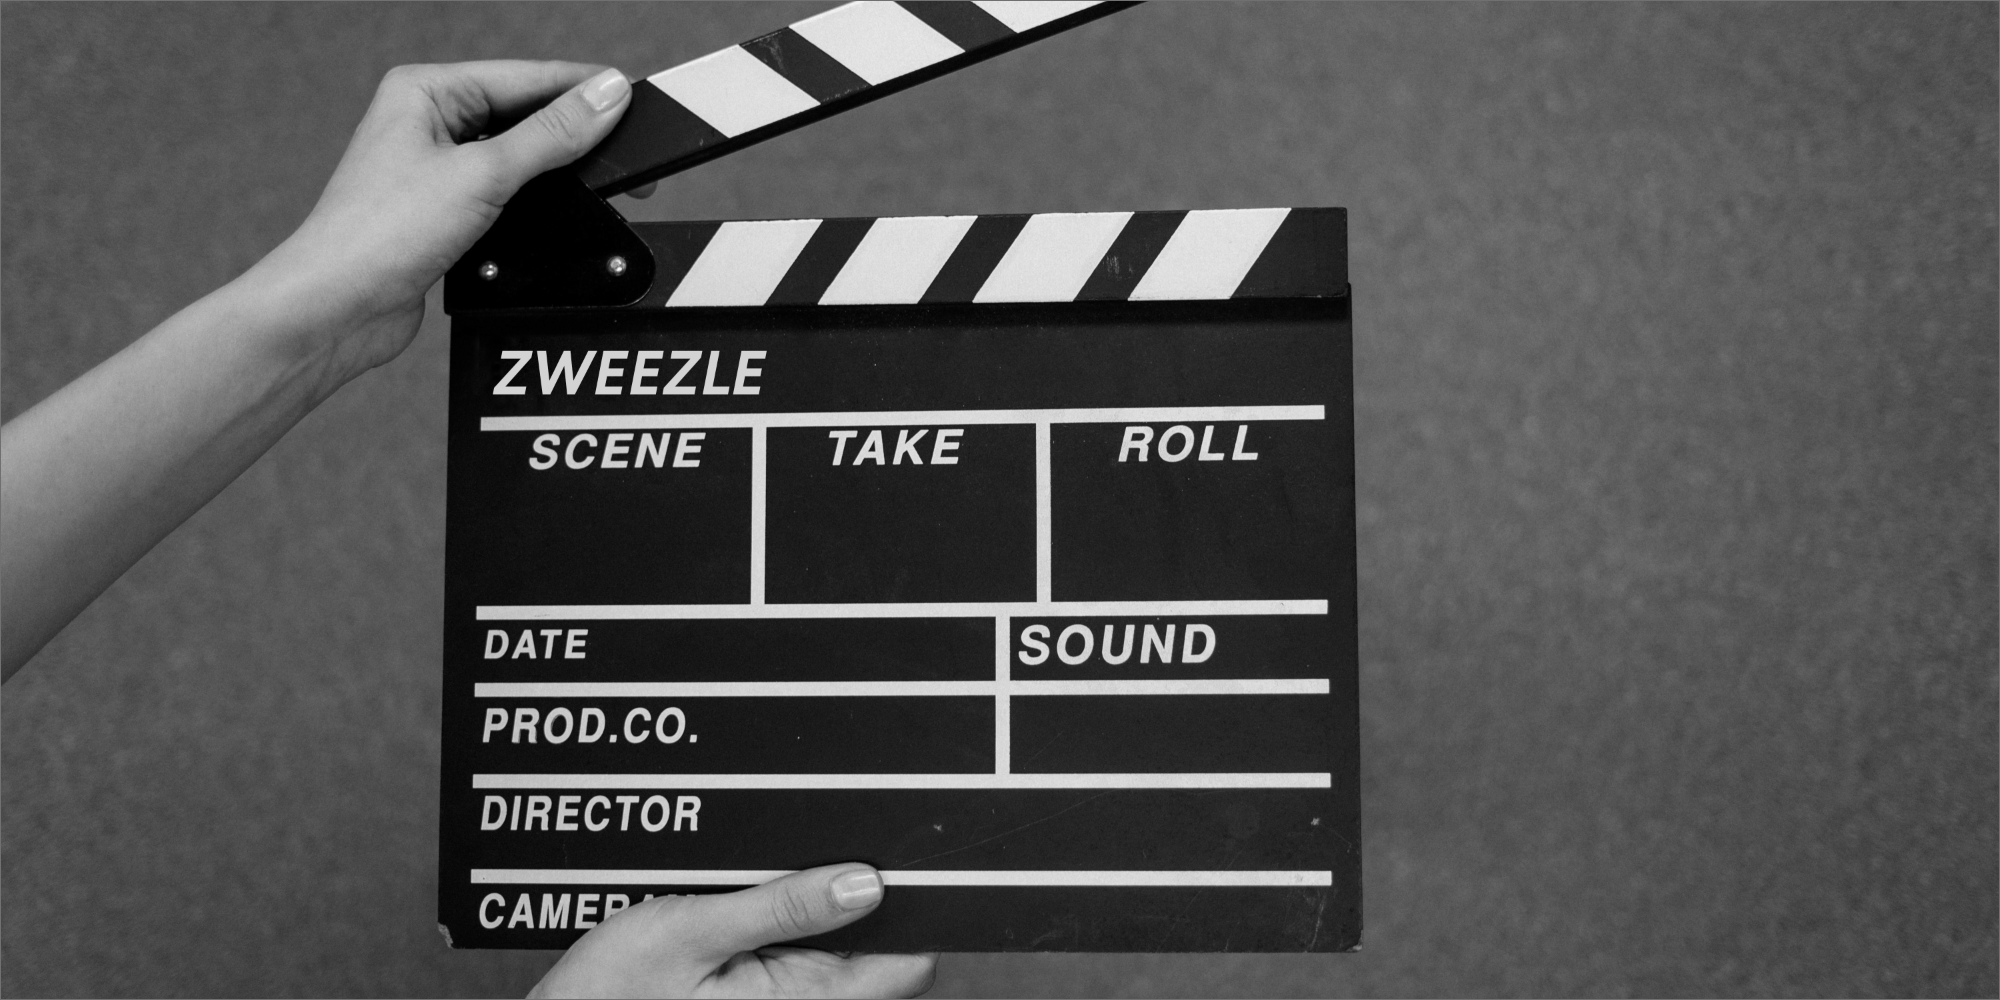 Video Production Agency